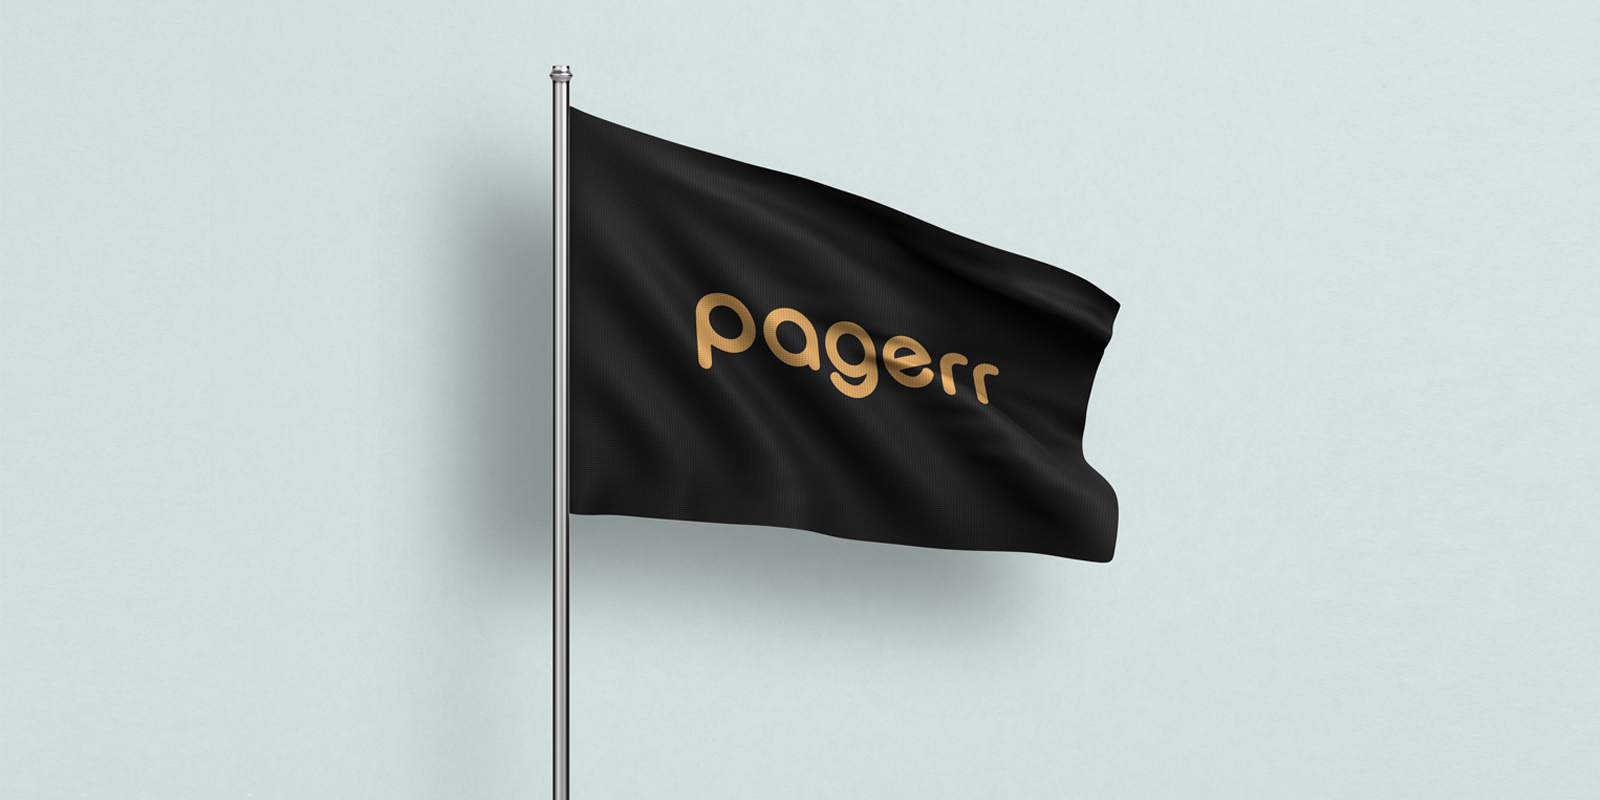 Flags in Perth - Print with Pagerr